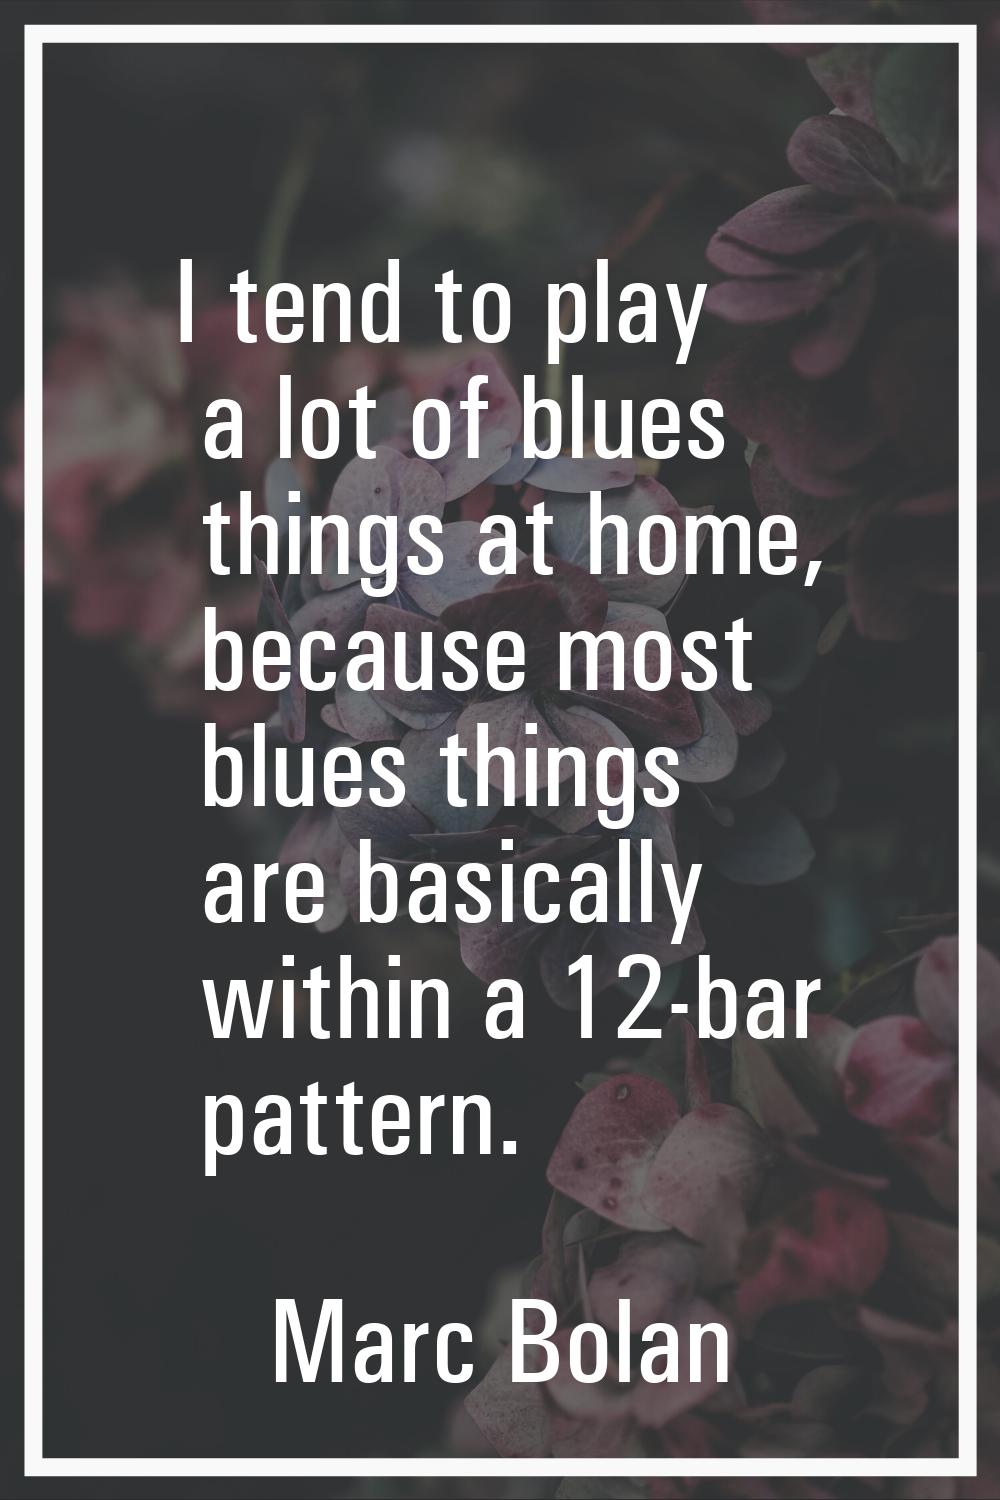 I tend to play a lot of blues things at home, because most blues things are basically within a 12-b